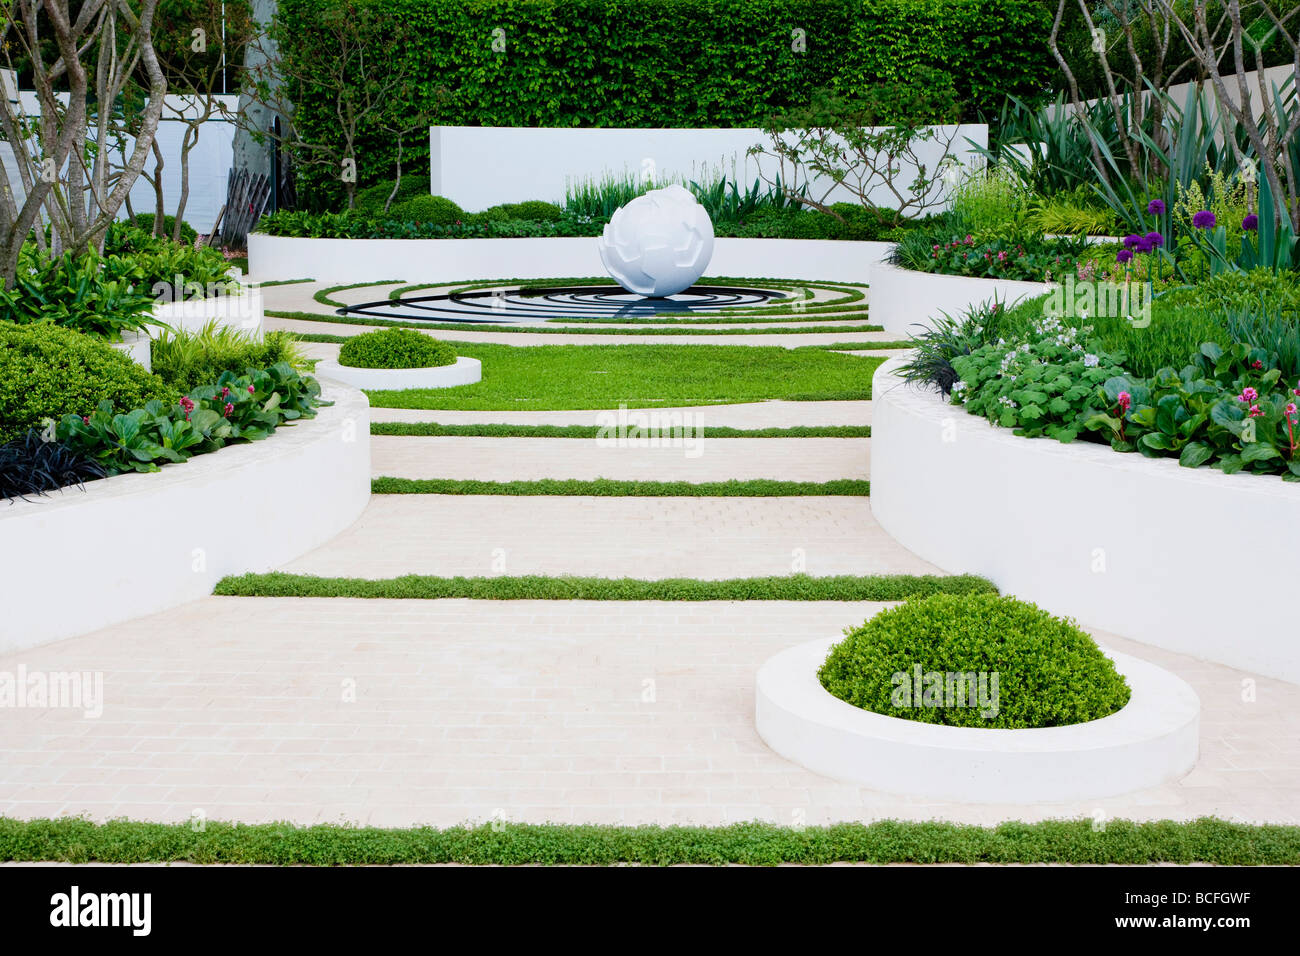 White globe sculpture in water rings with white paving and walls with raised beds Stock Photo